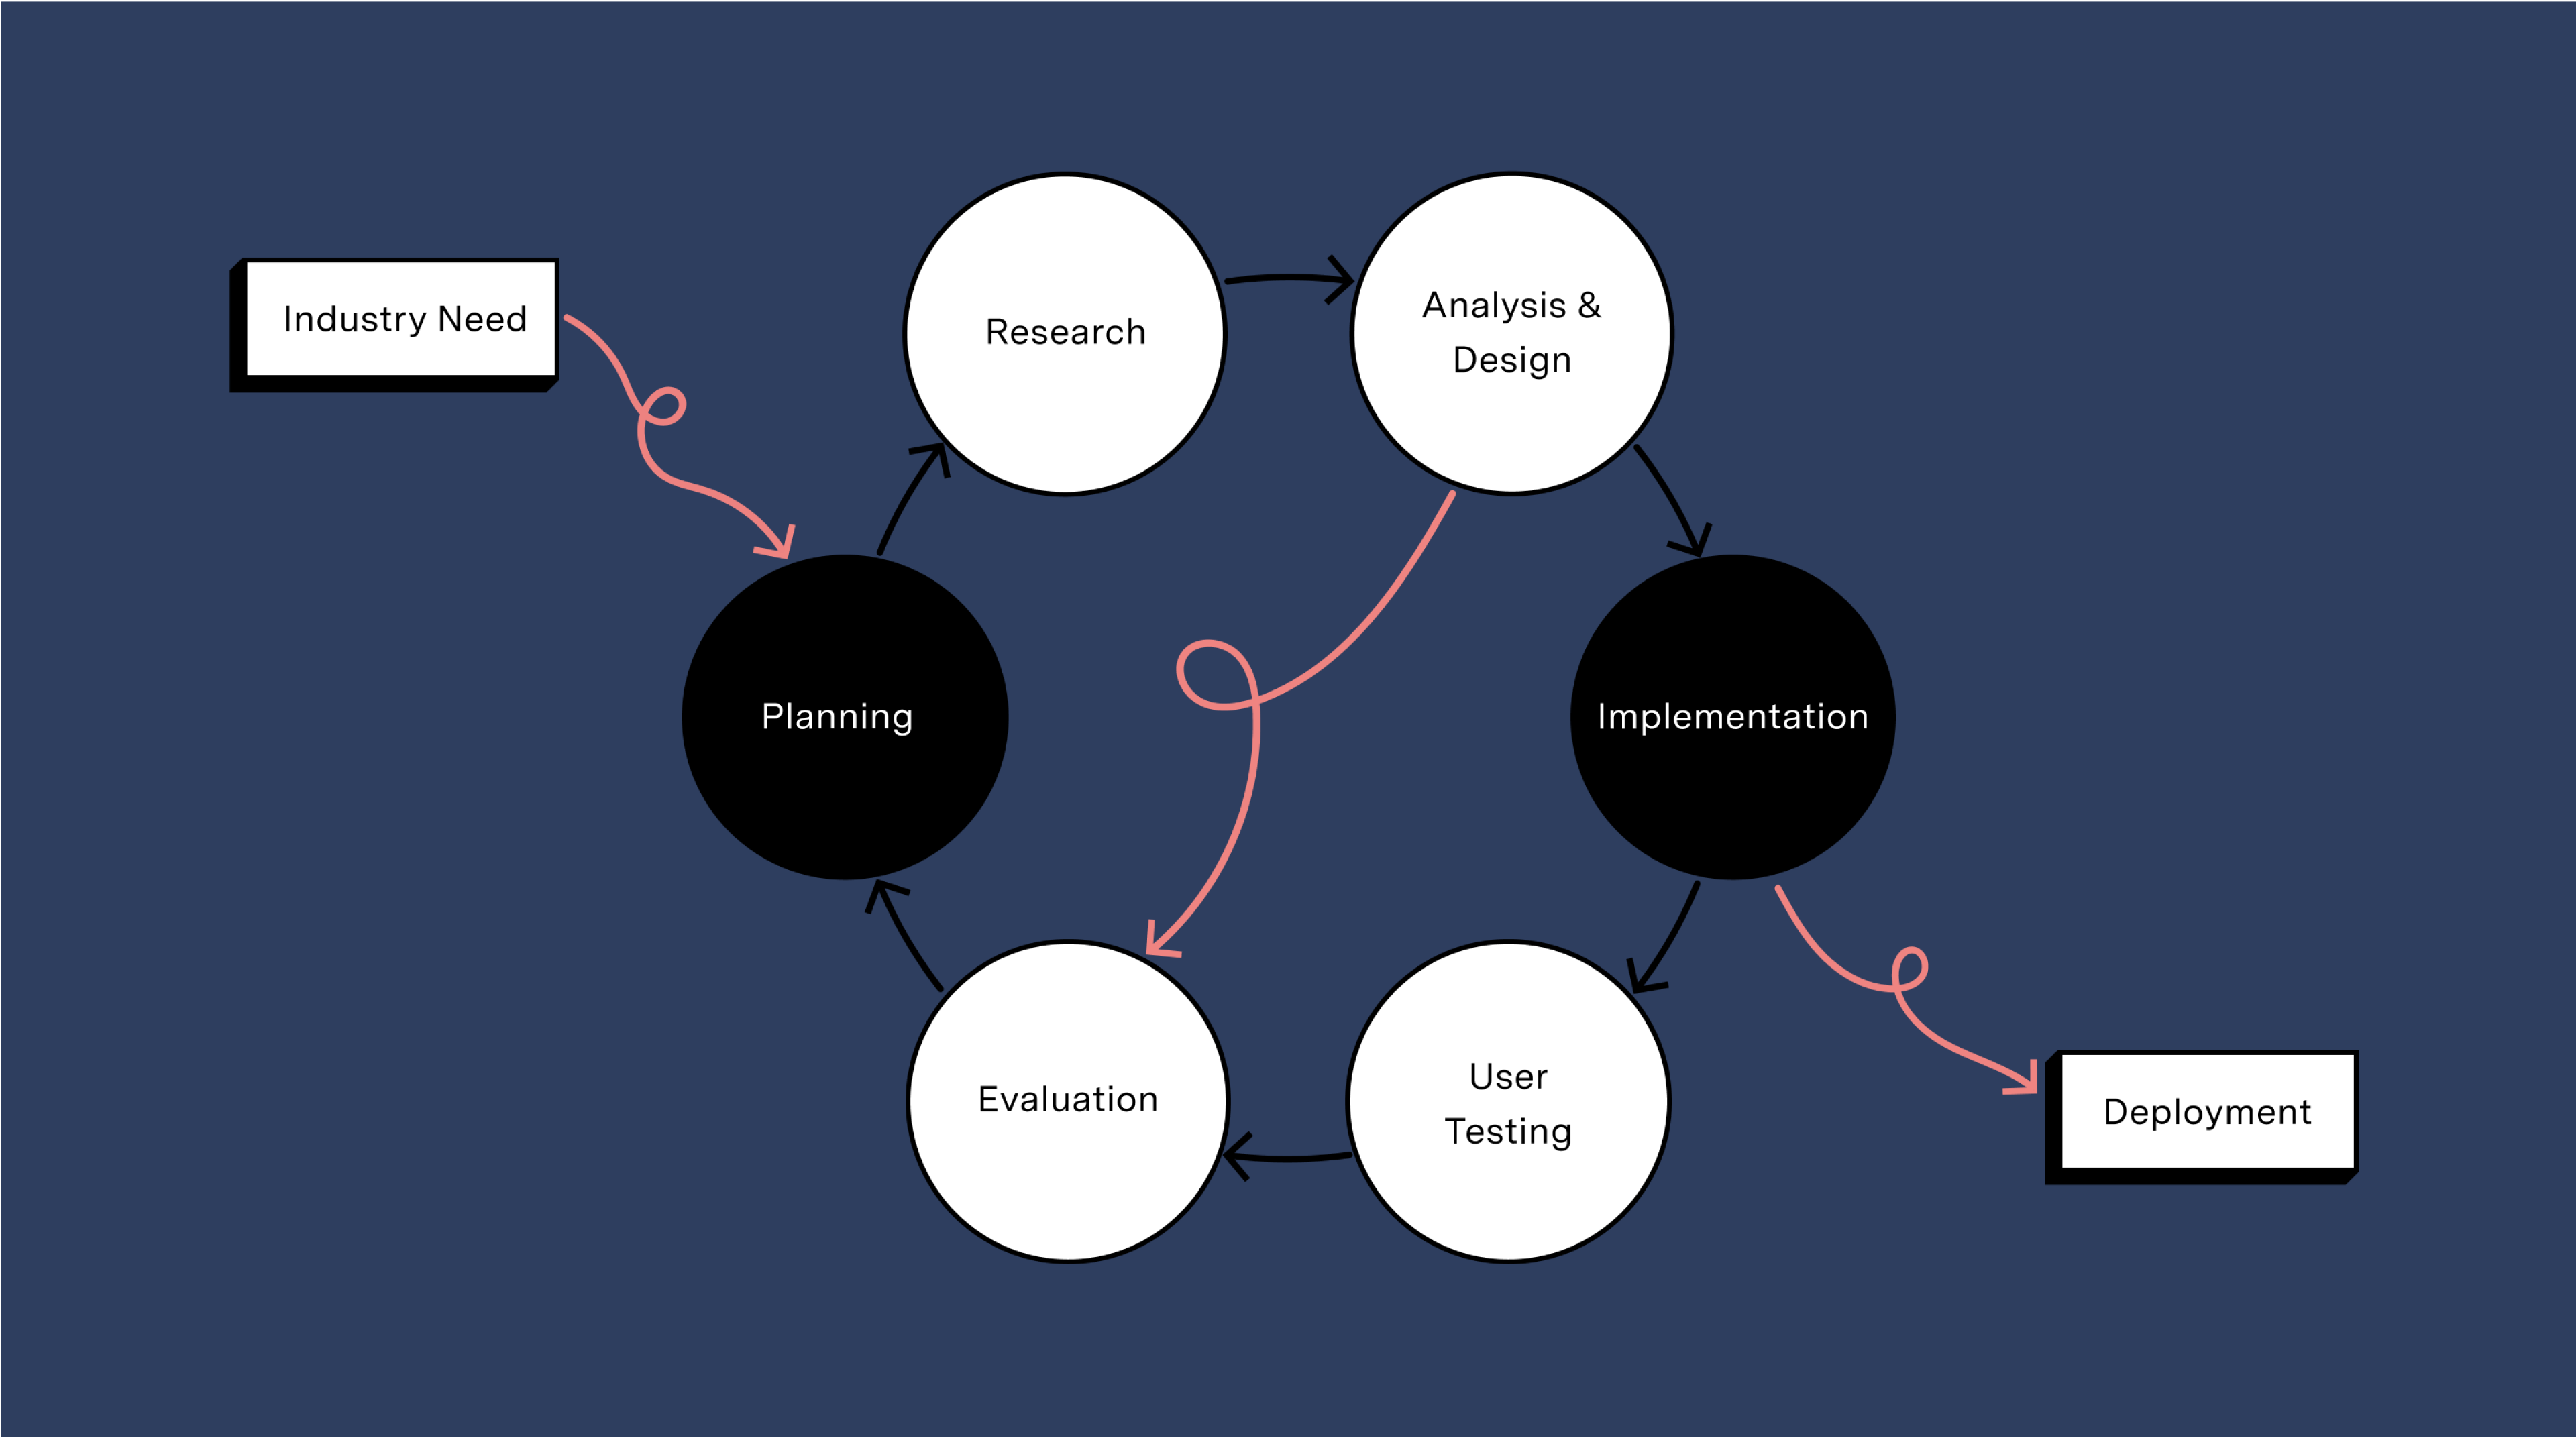 Diagram of our process. Industry need leads into the process starting with planning, then research, then analysis and desig then implementation then user testing then evaluation and it continues in a cycle. The cycle exits at implementation